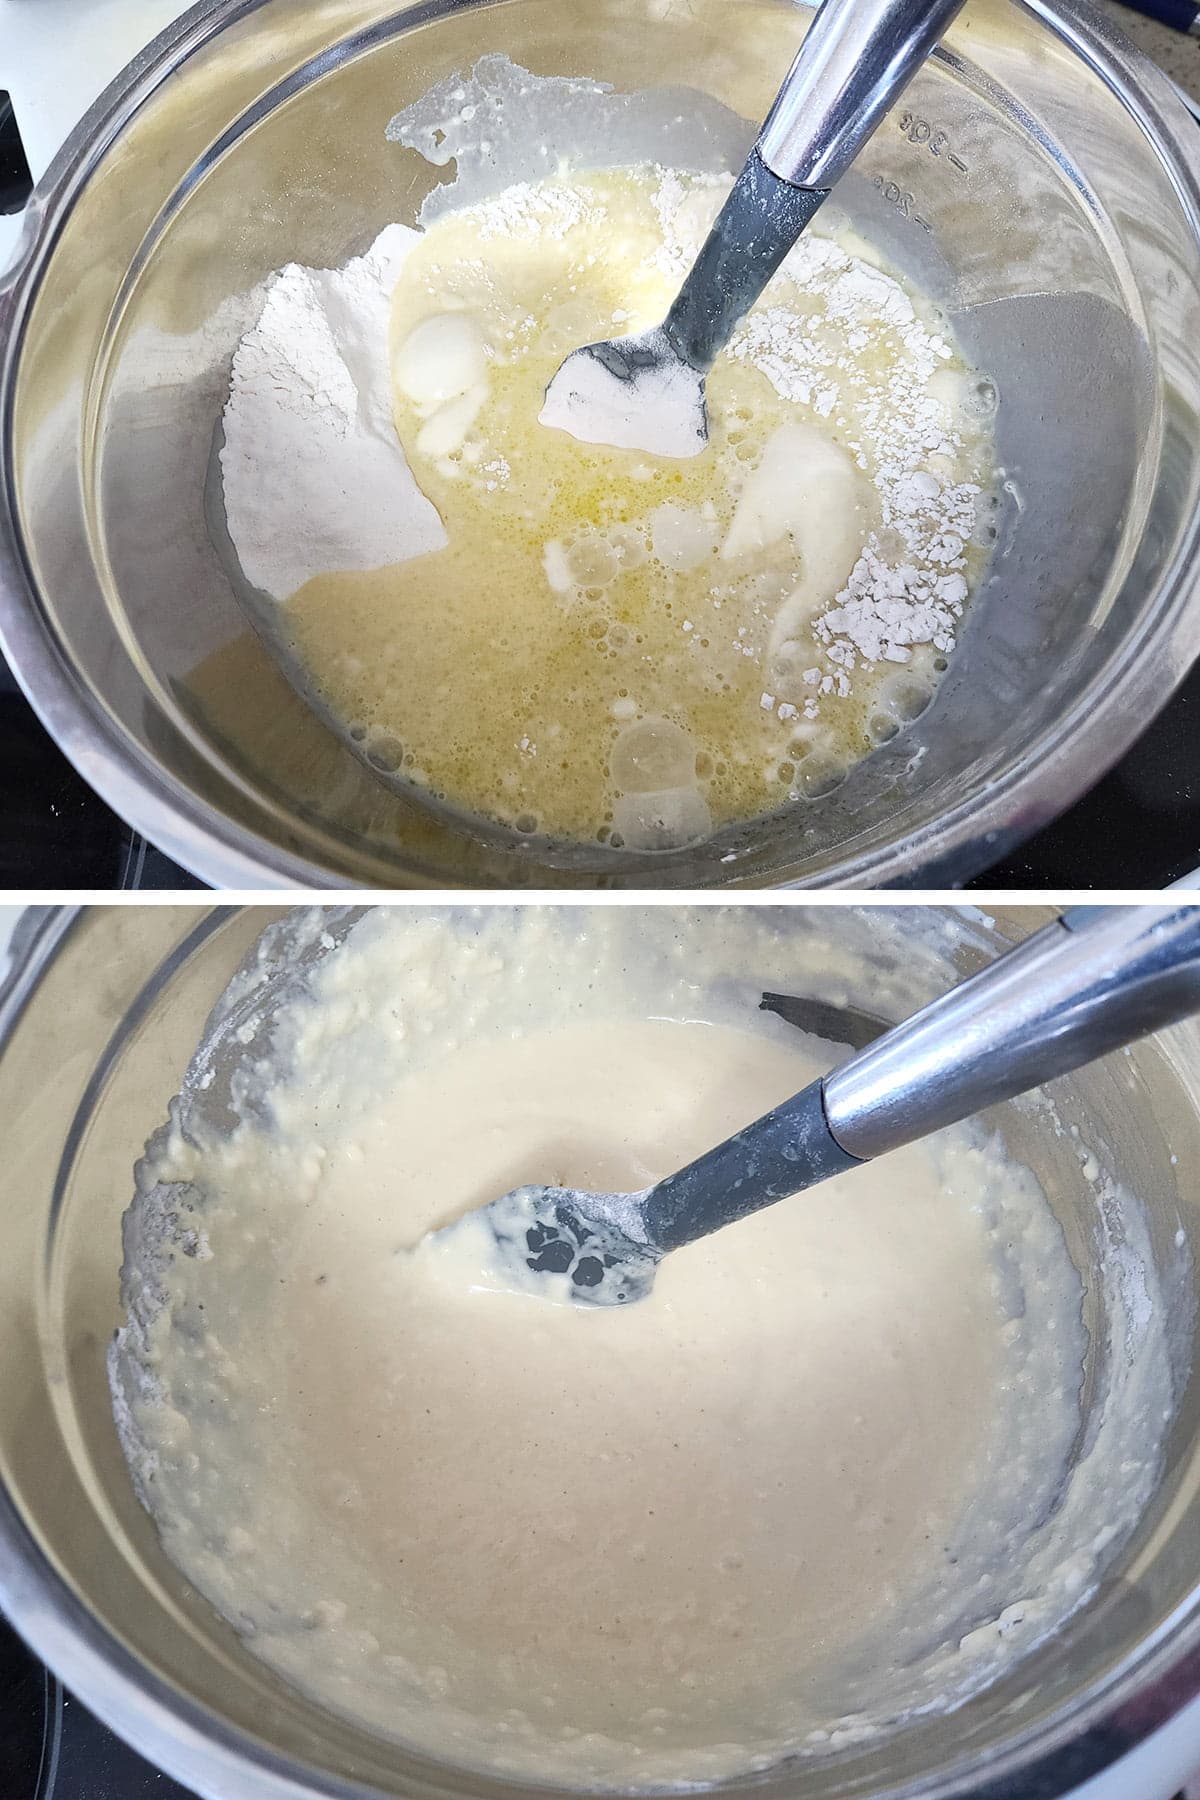 A two part compilation image showing the wet ingredients being added to the bowl of dry ingredients, before and after being mixed together.